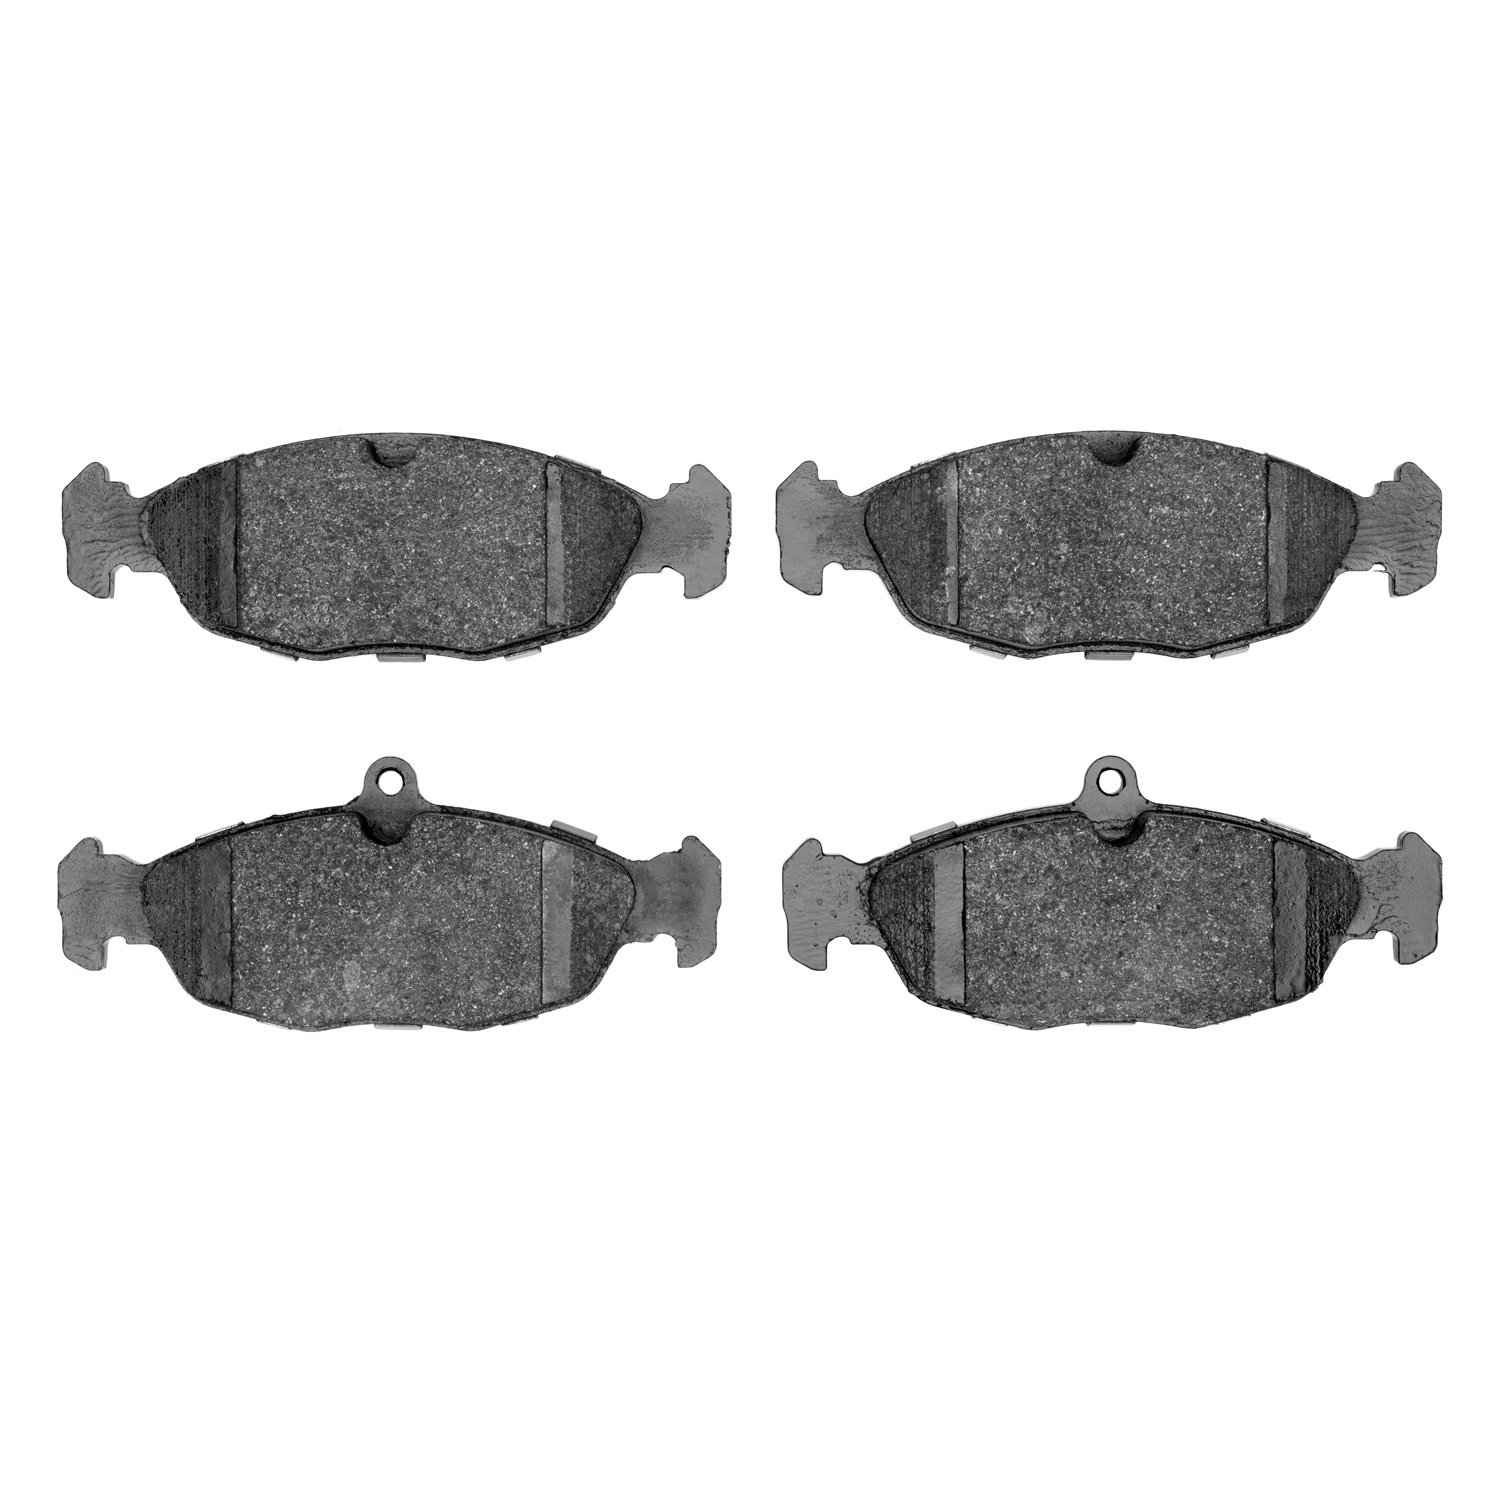 1551-0688-00 5000 Advanced Low-Metallic Brake Pads, 1994-2010 Multiple Makes/Models, Position: Front,Rear